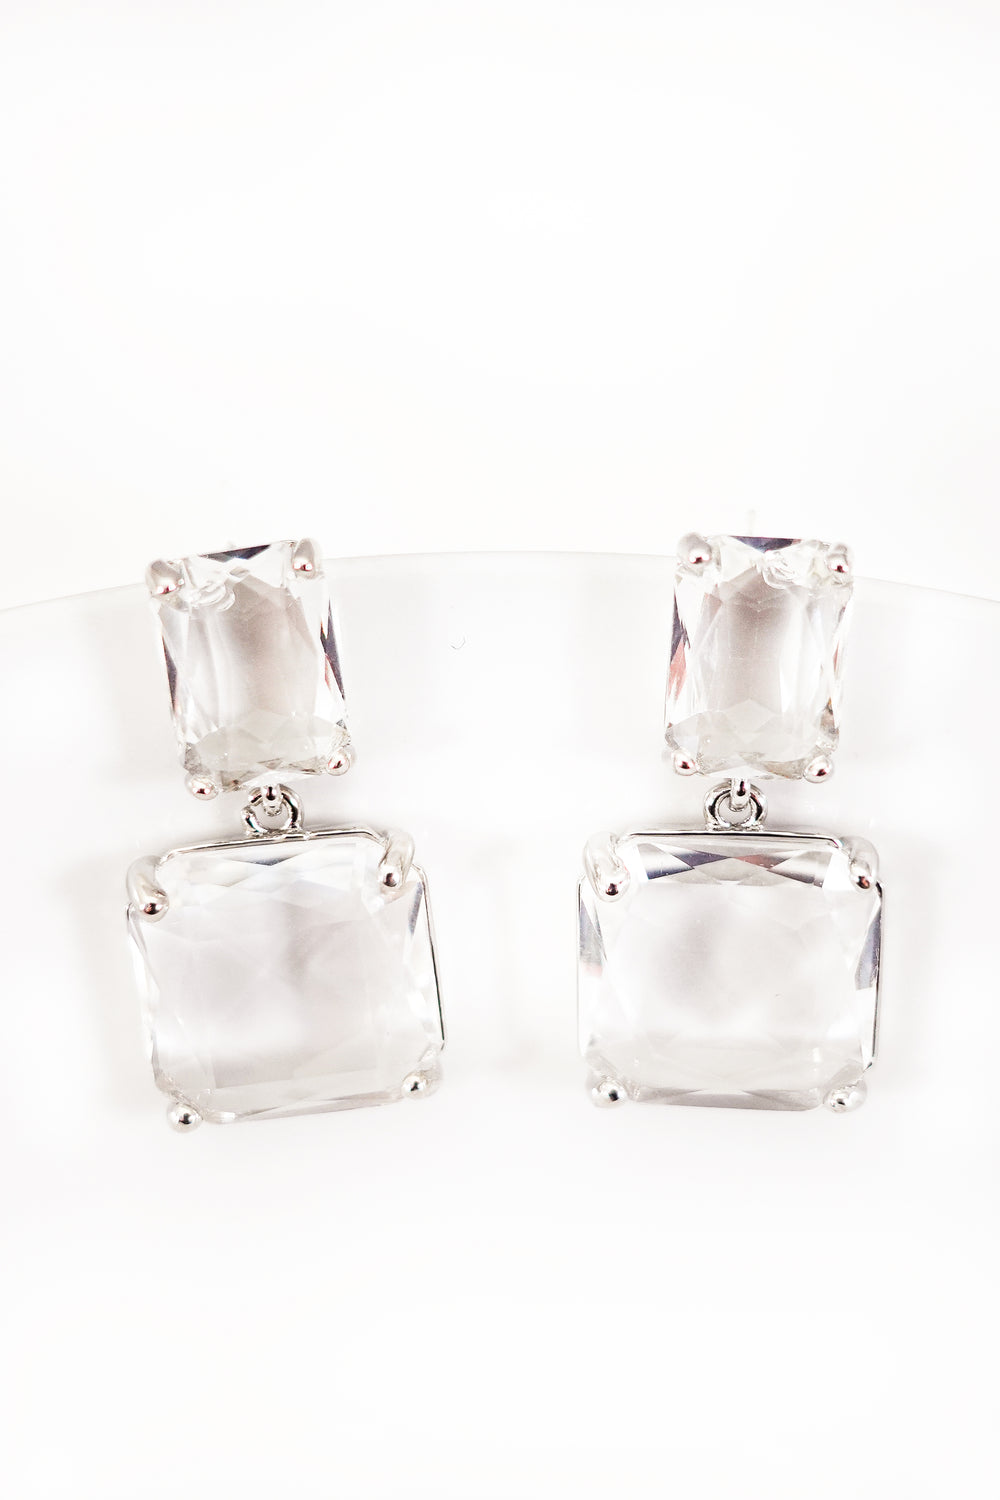 Black Diamond Square Studs in Sterling Silver – IceTrends